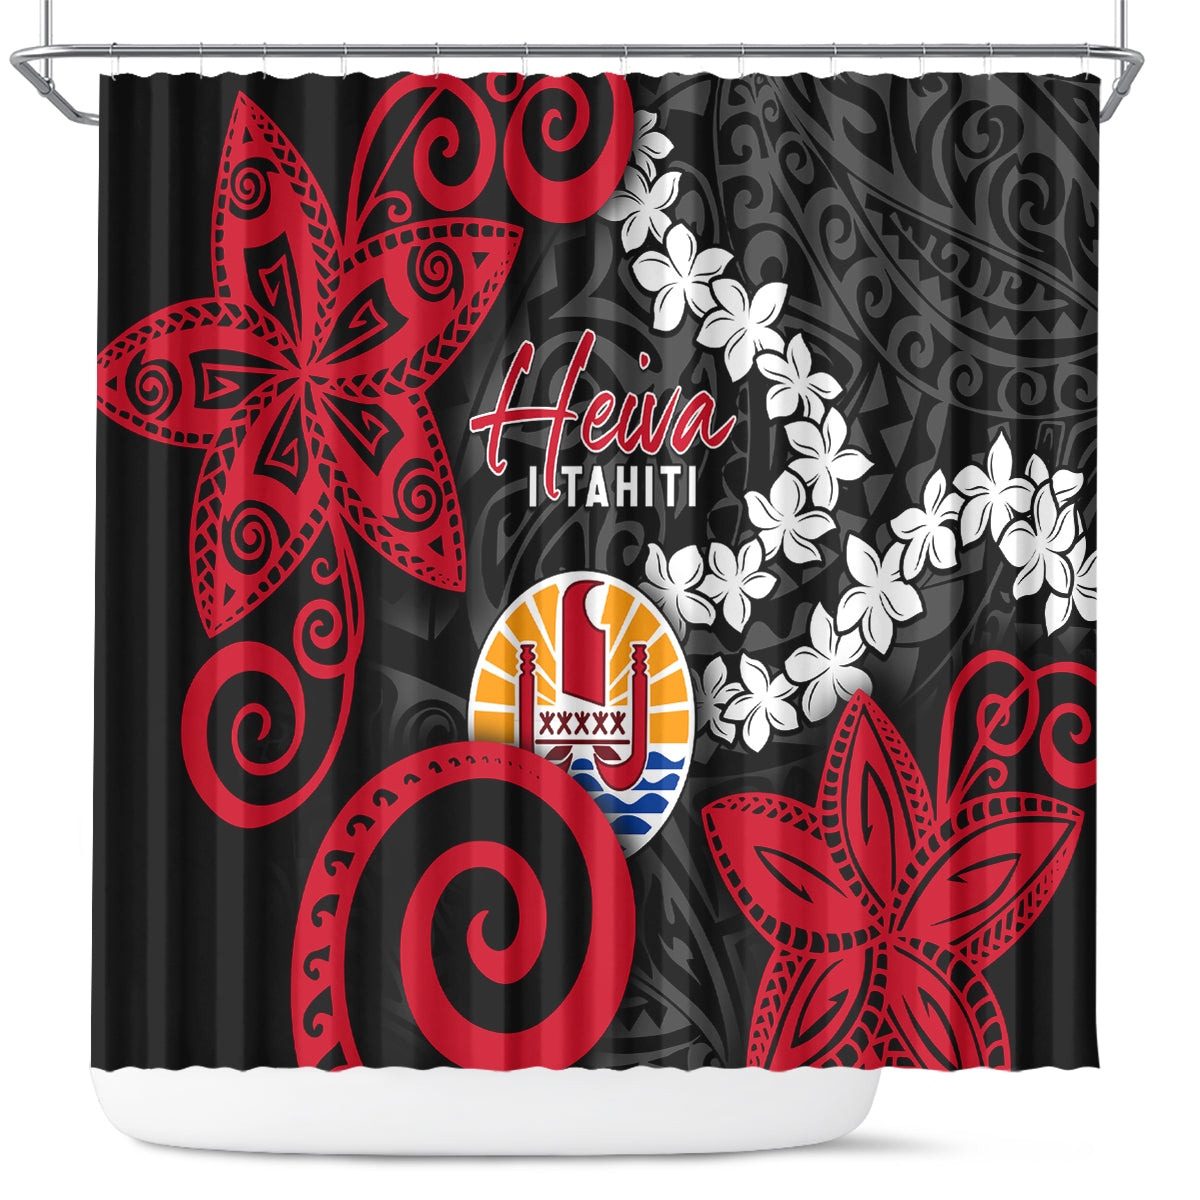 Tahiti Heiva Festival Shower Curtain Floral Pattern With Coat Of Arms